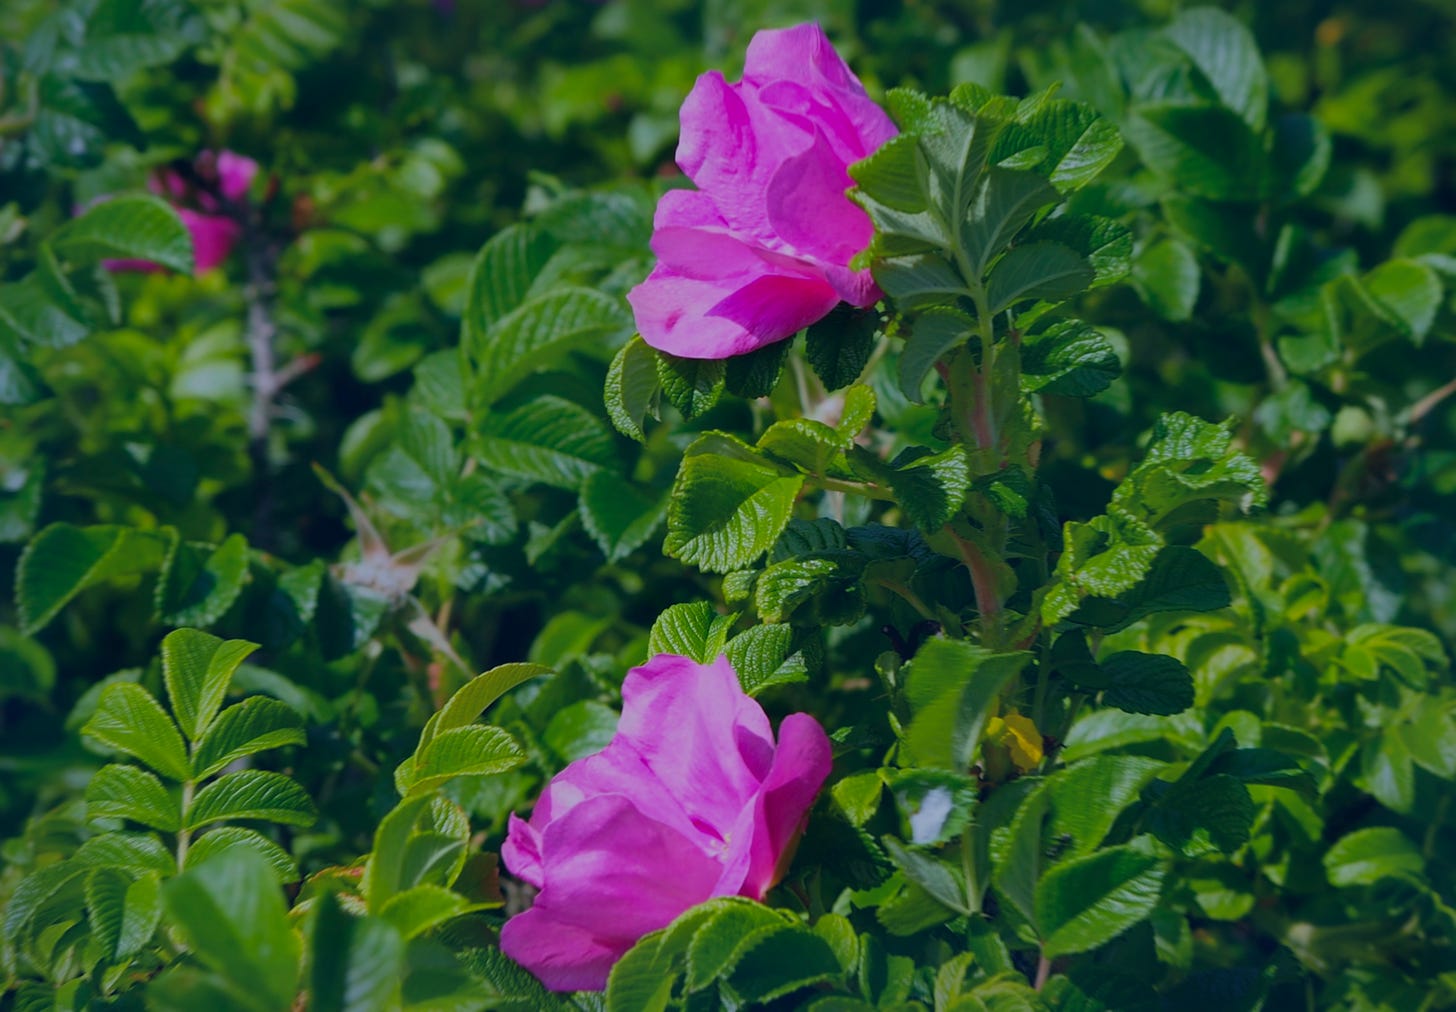 Photograph of a verdant rosebush with two wild-looking, rumpled roses in bloom.